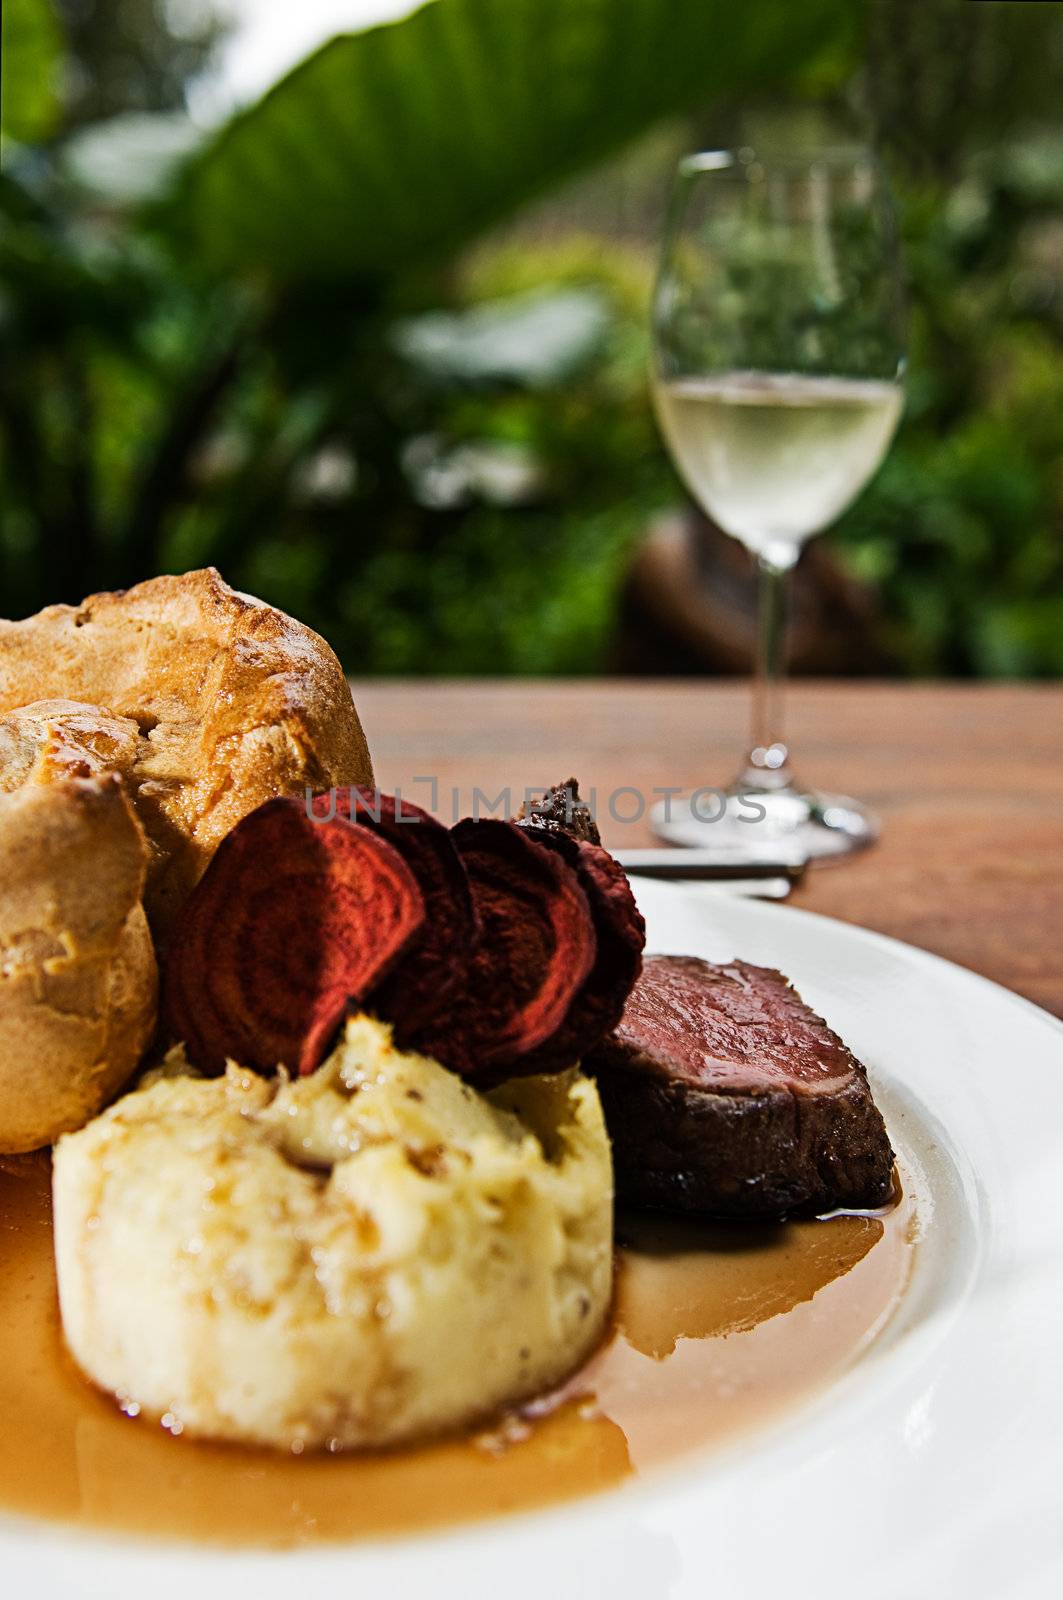 A roast beef with mash potato, yorkshire pudding, beetroot chips, gravy and a glass of white wine.